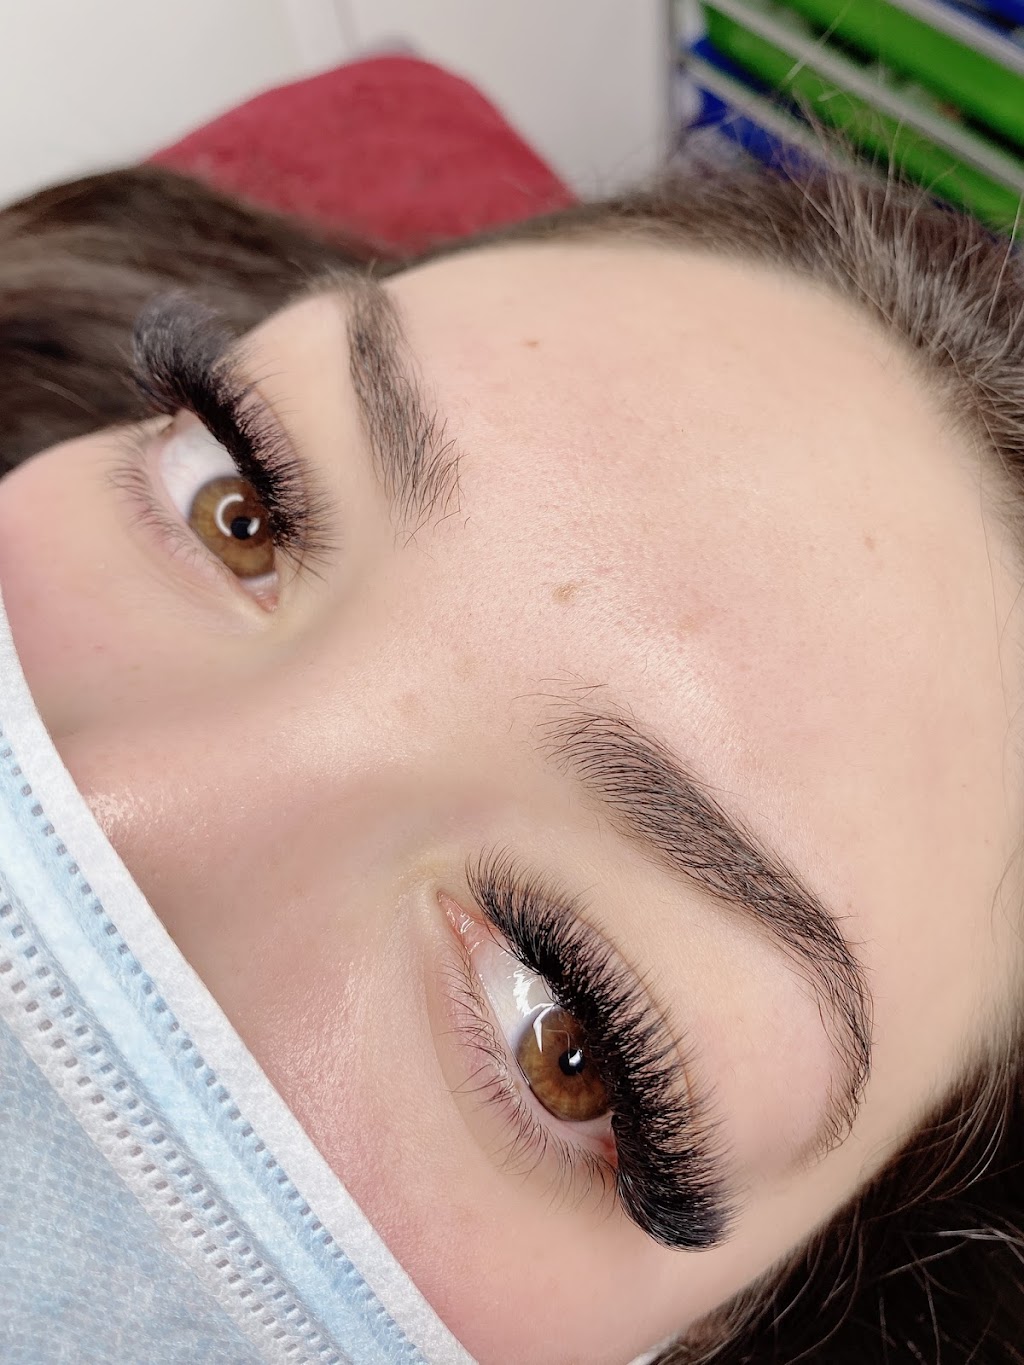 Queen lashes and brows | beauty salon | 923 Ballarat Rd, Deer Park VIC 3023, Australia | 0469044033 OR +61 469 044 033